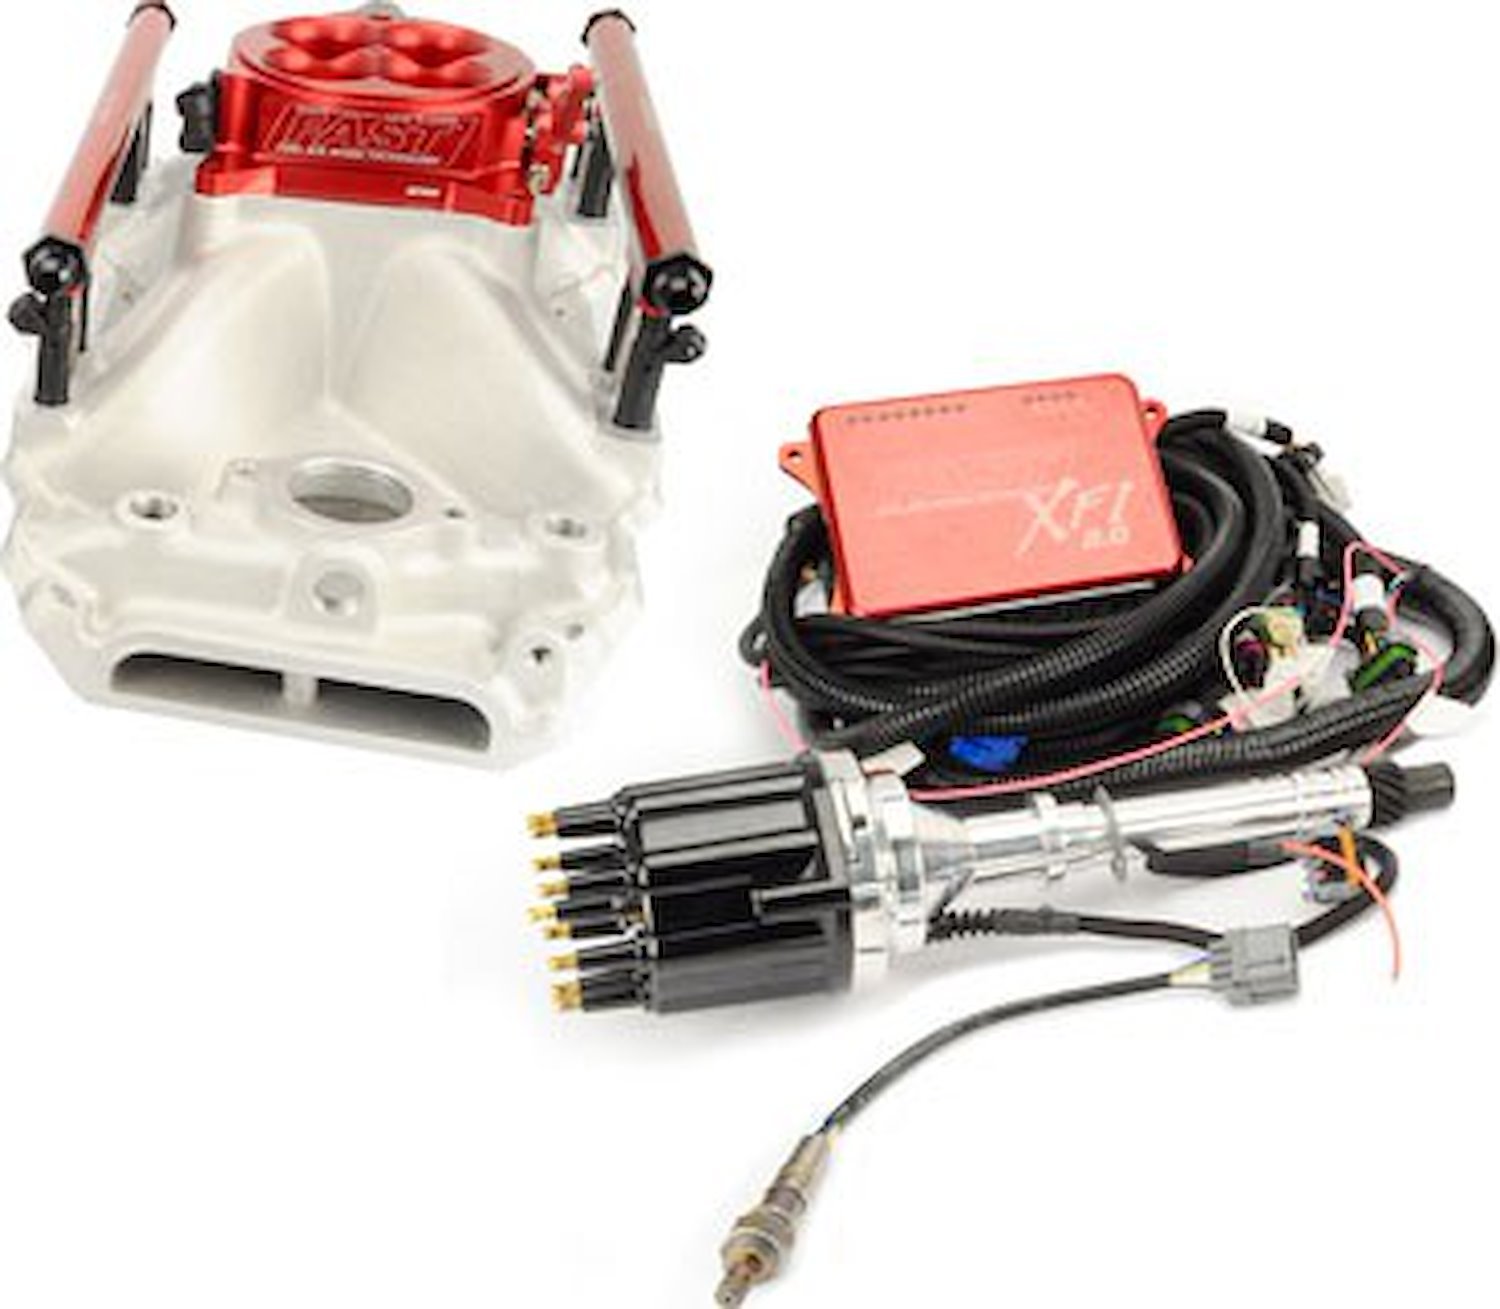 EFI KIT COMPLETE FW UP TO 55